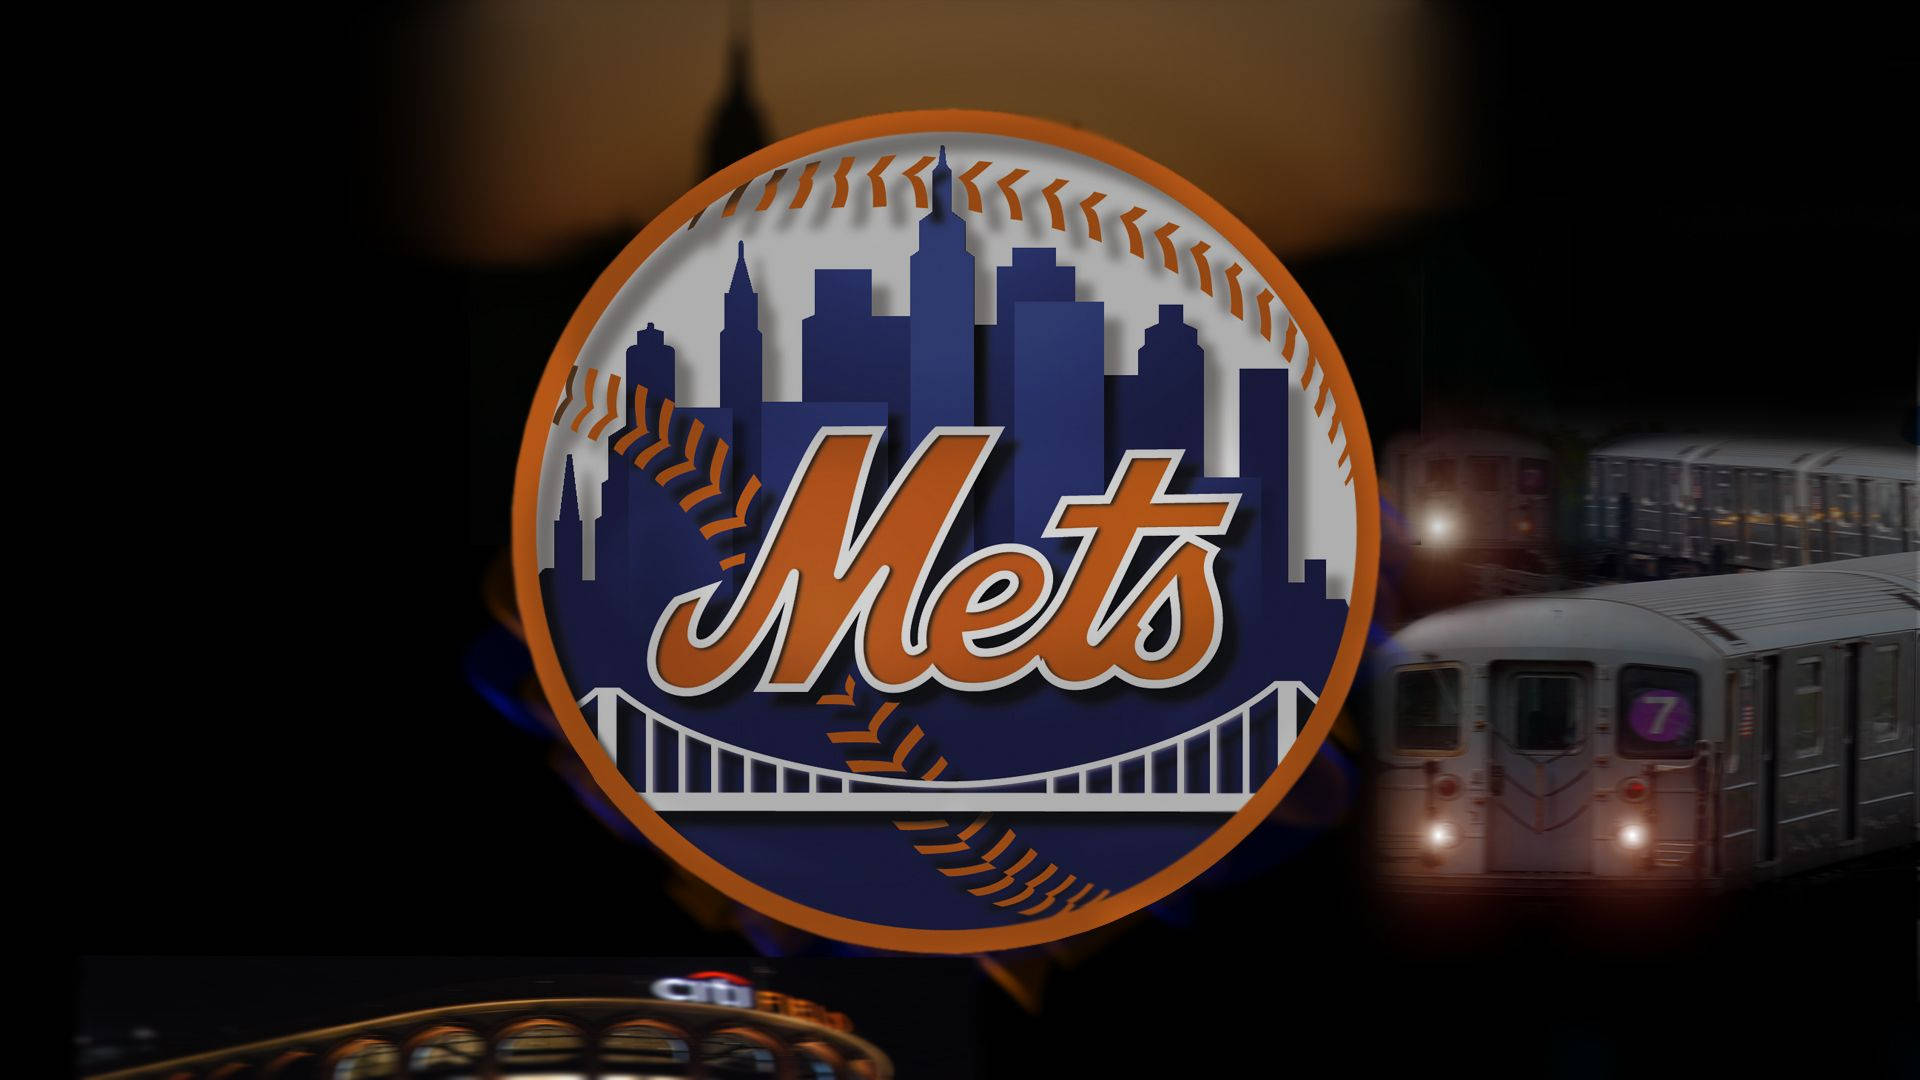 New York Mets Trains Background